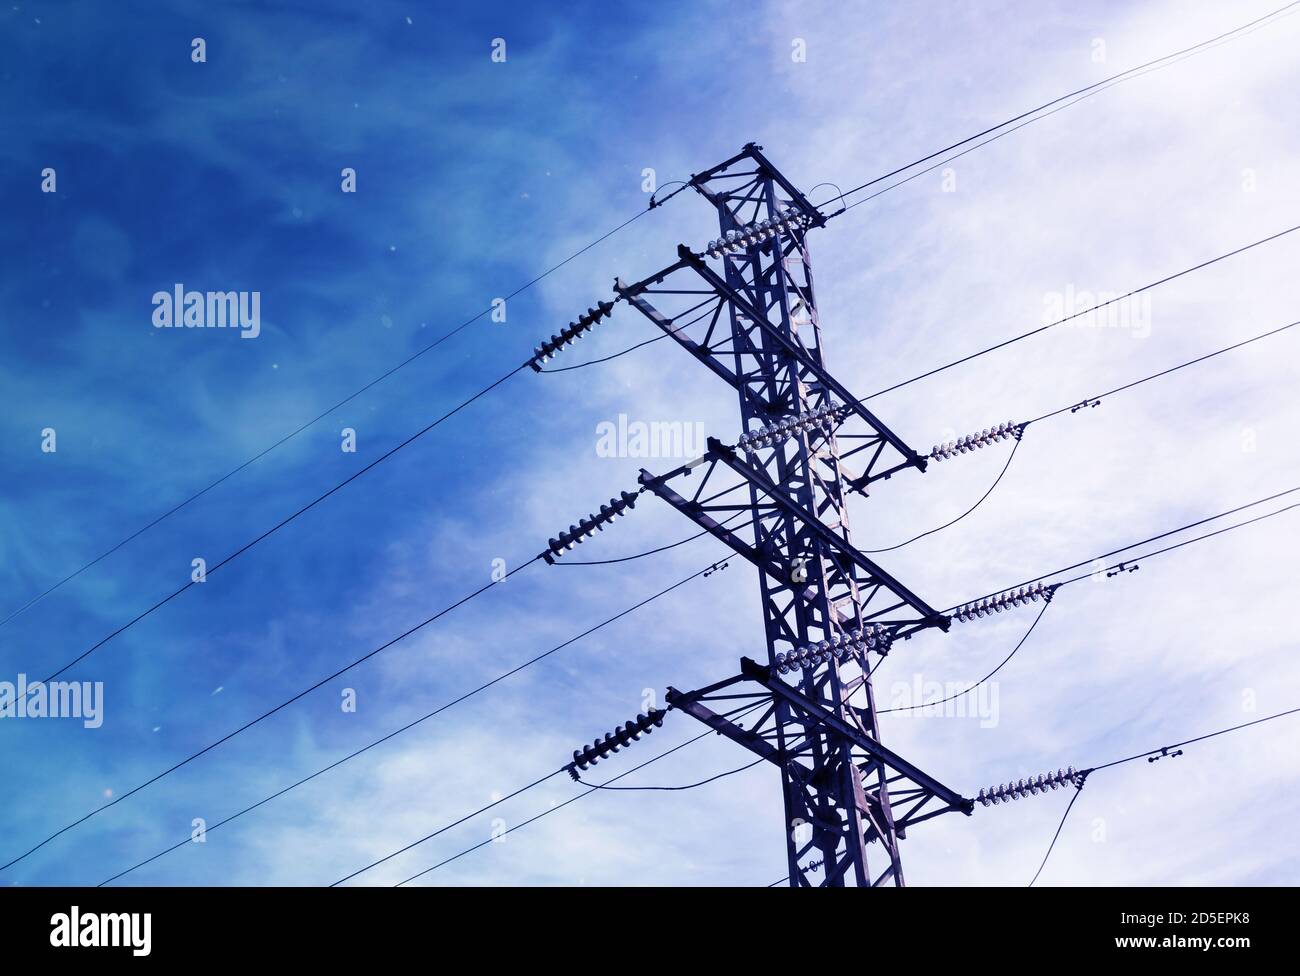 Energy distribution high voltage power line tower with wires Stock Photo